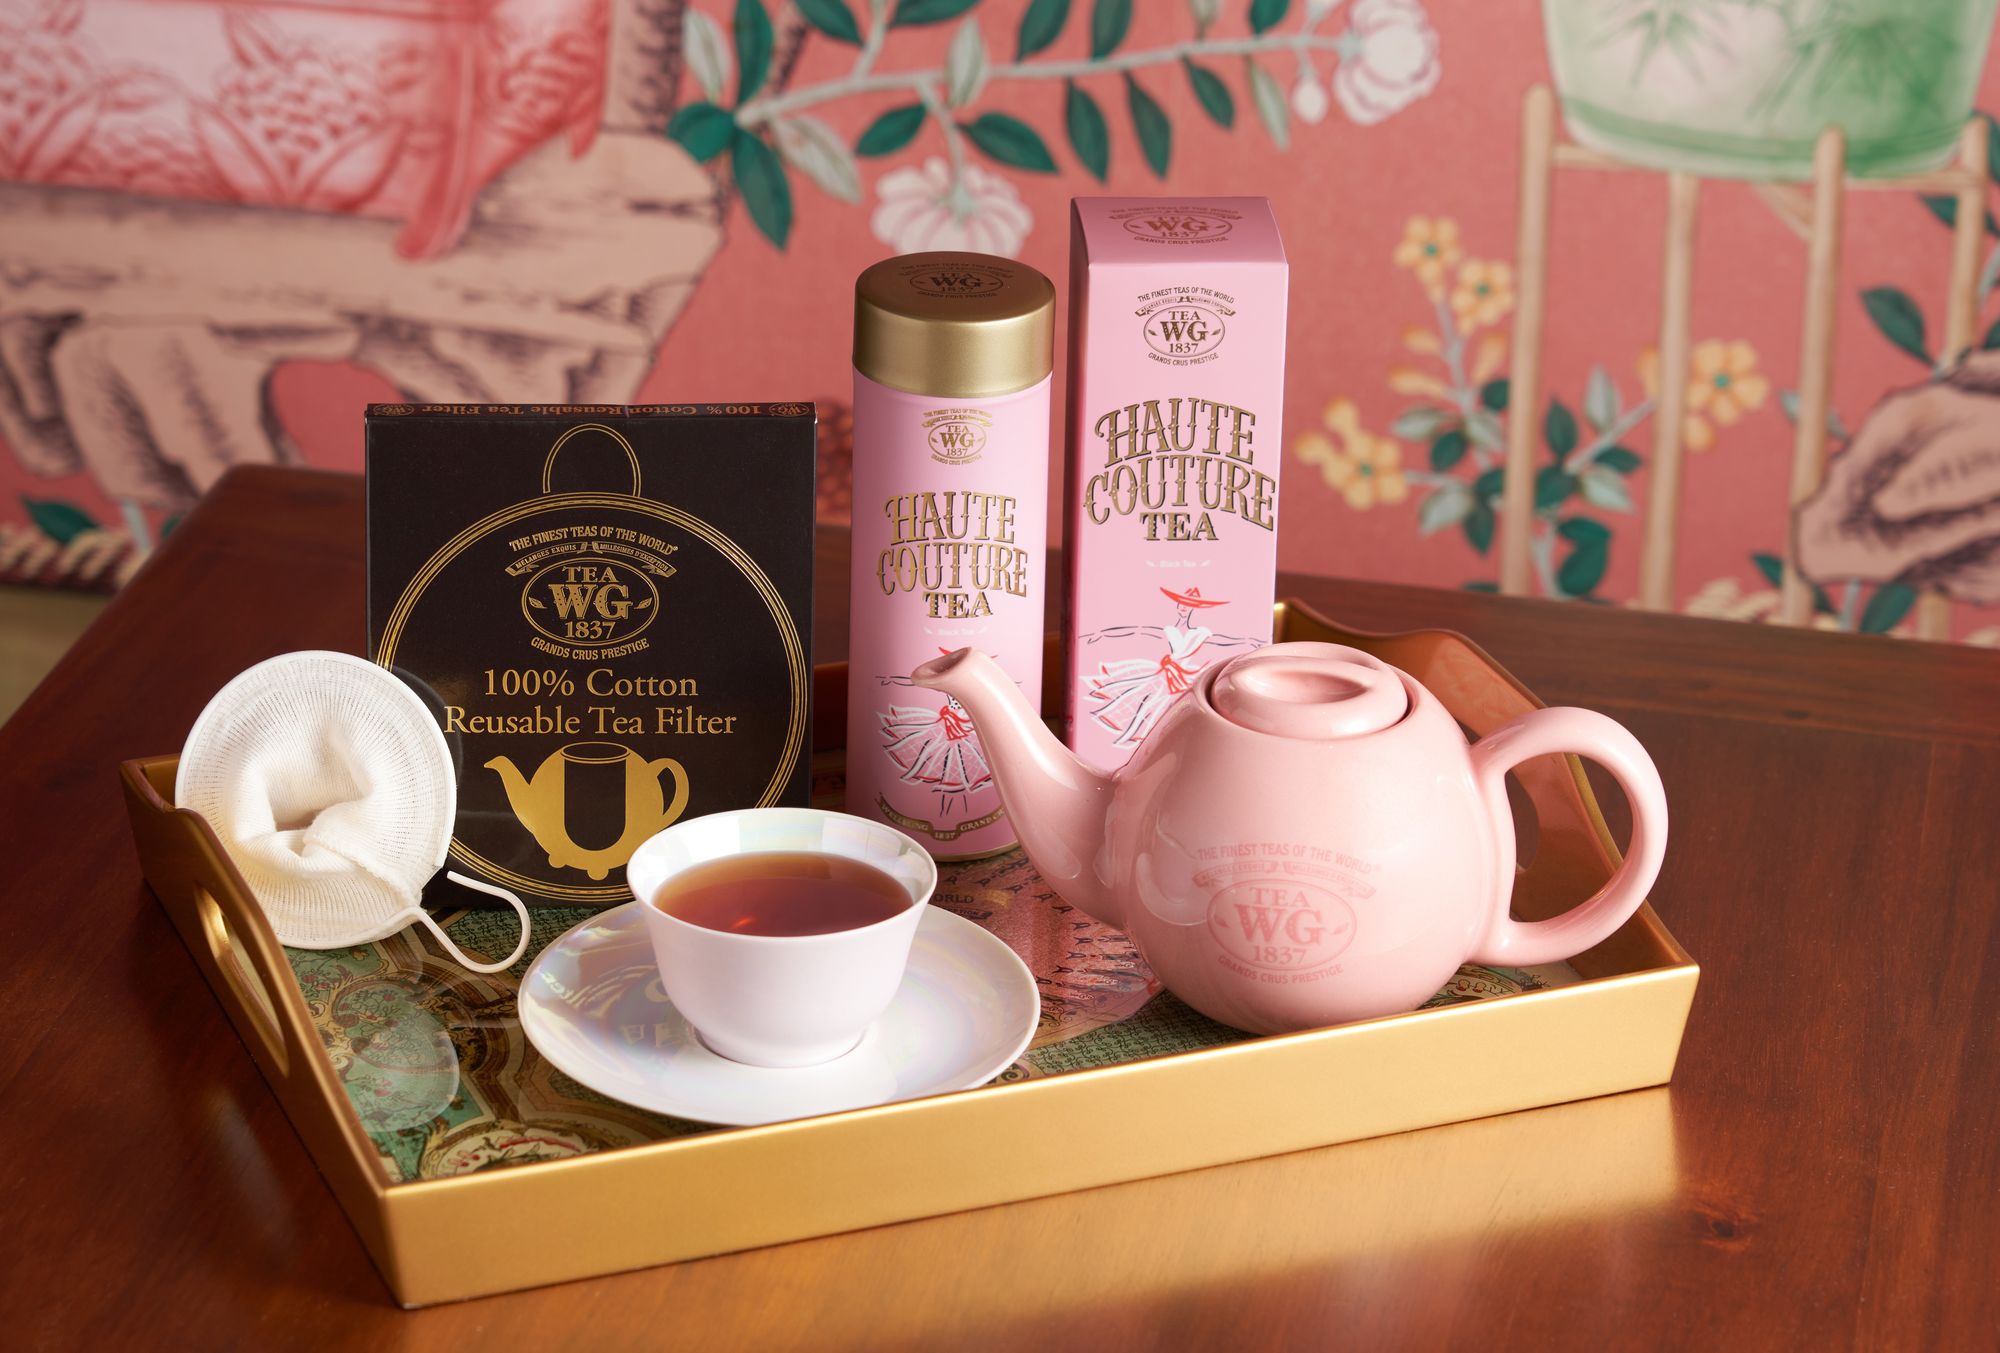 Pamper The Queen of Your Heart with Tea WG this Blossoming Spring